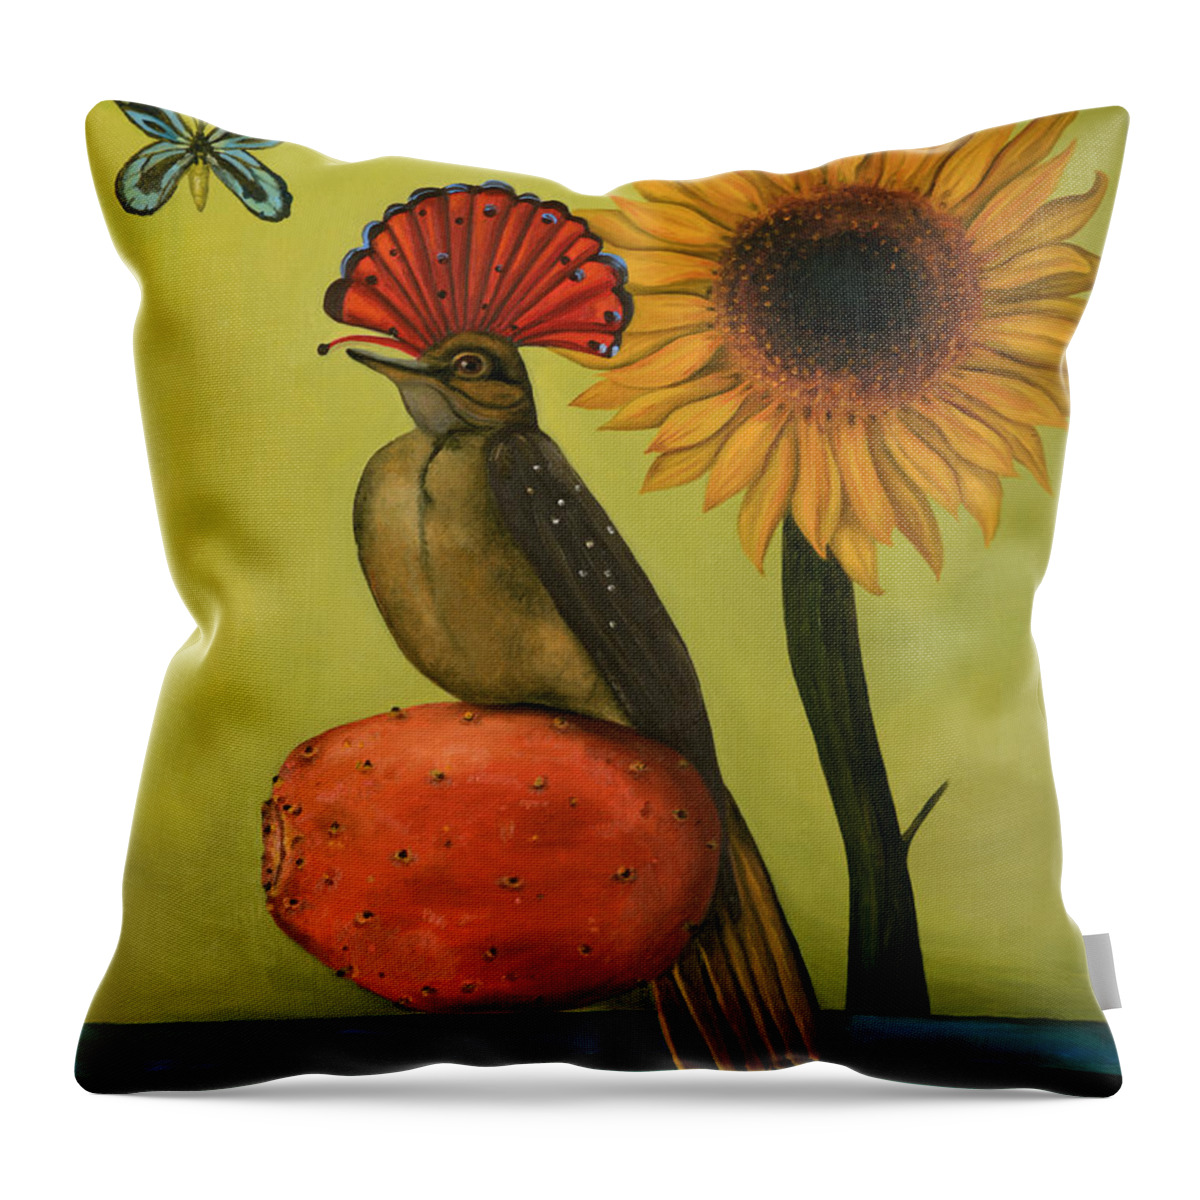 Royal Flycatcher Throw Pillow featuring the painting Royal Flycatcher by Leah Saulnier The Painting Maniac